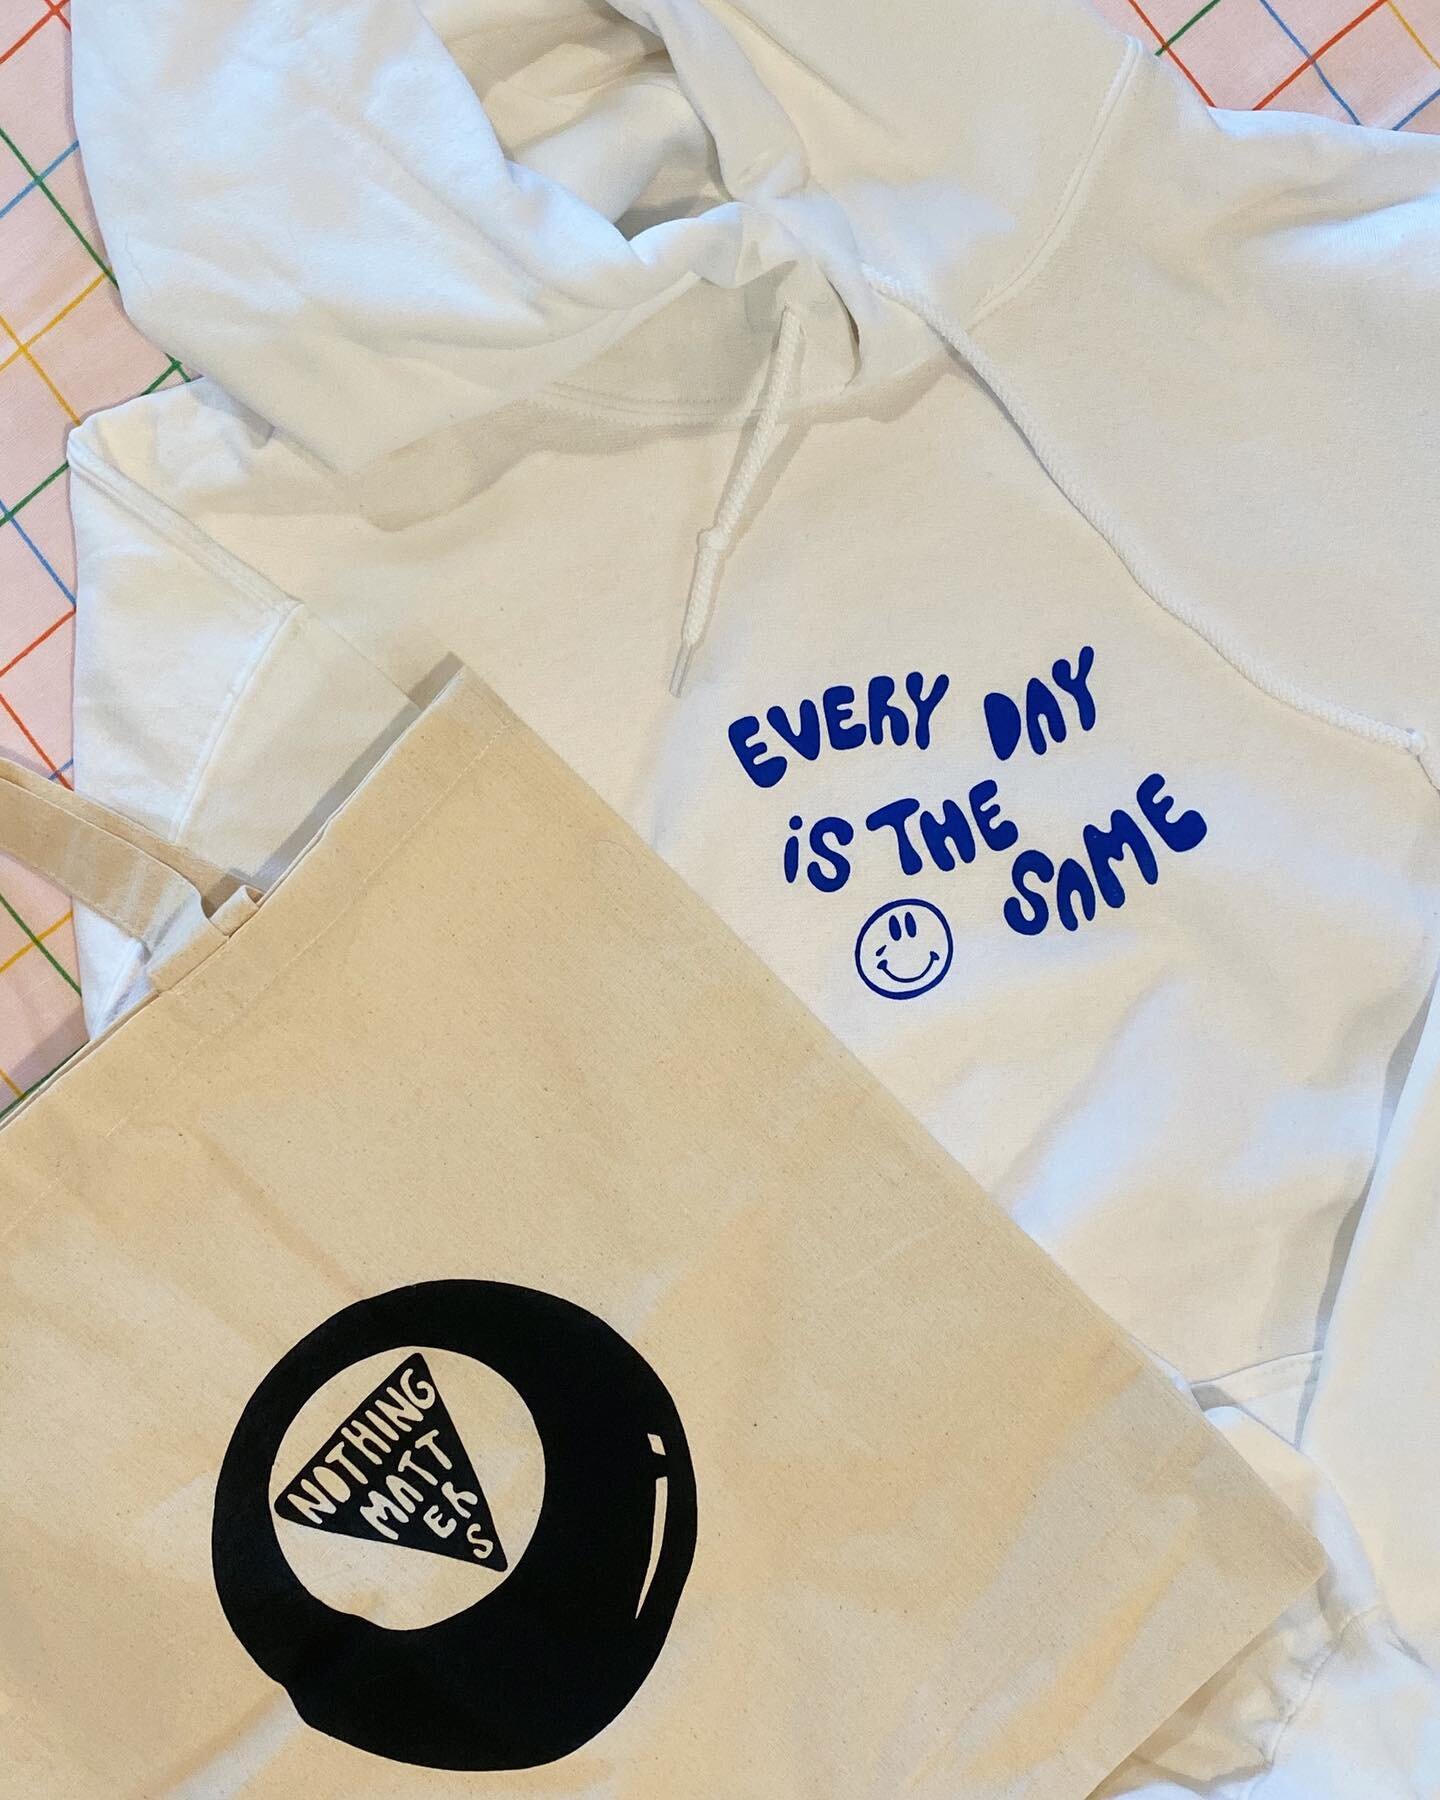 VALENTINES GIVEAWAY!!!! 💙💙💙
Before I open things up again I want to give two special people some thangs. 1st winner will receive the hoodie and tote bag and 2nd place winner will receive the crew neck! 

RULEZ:
1. like the picture and tag someone 